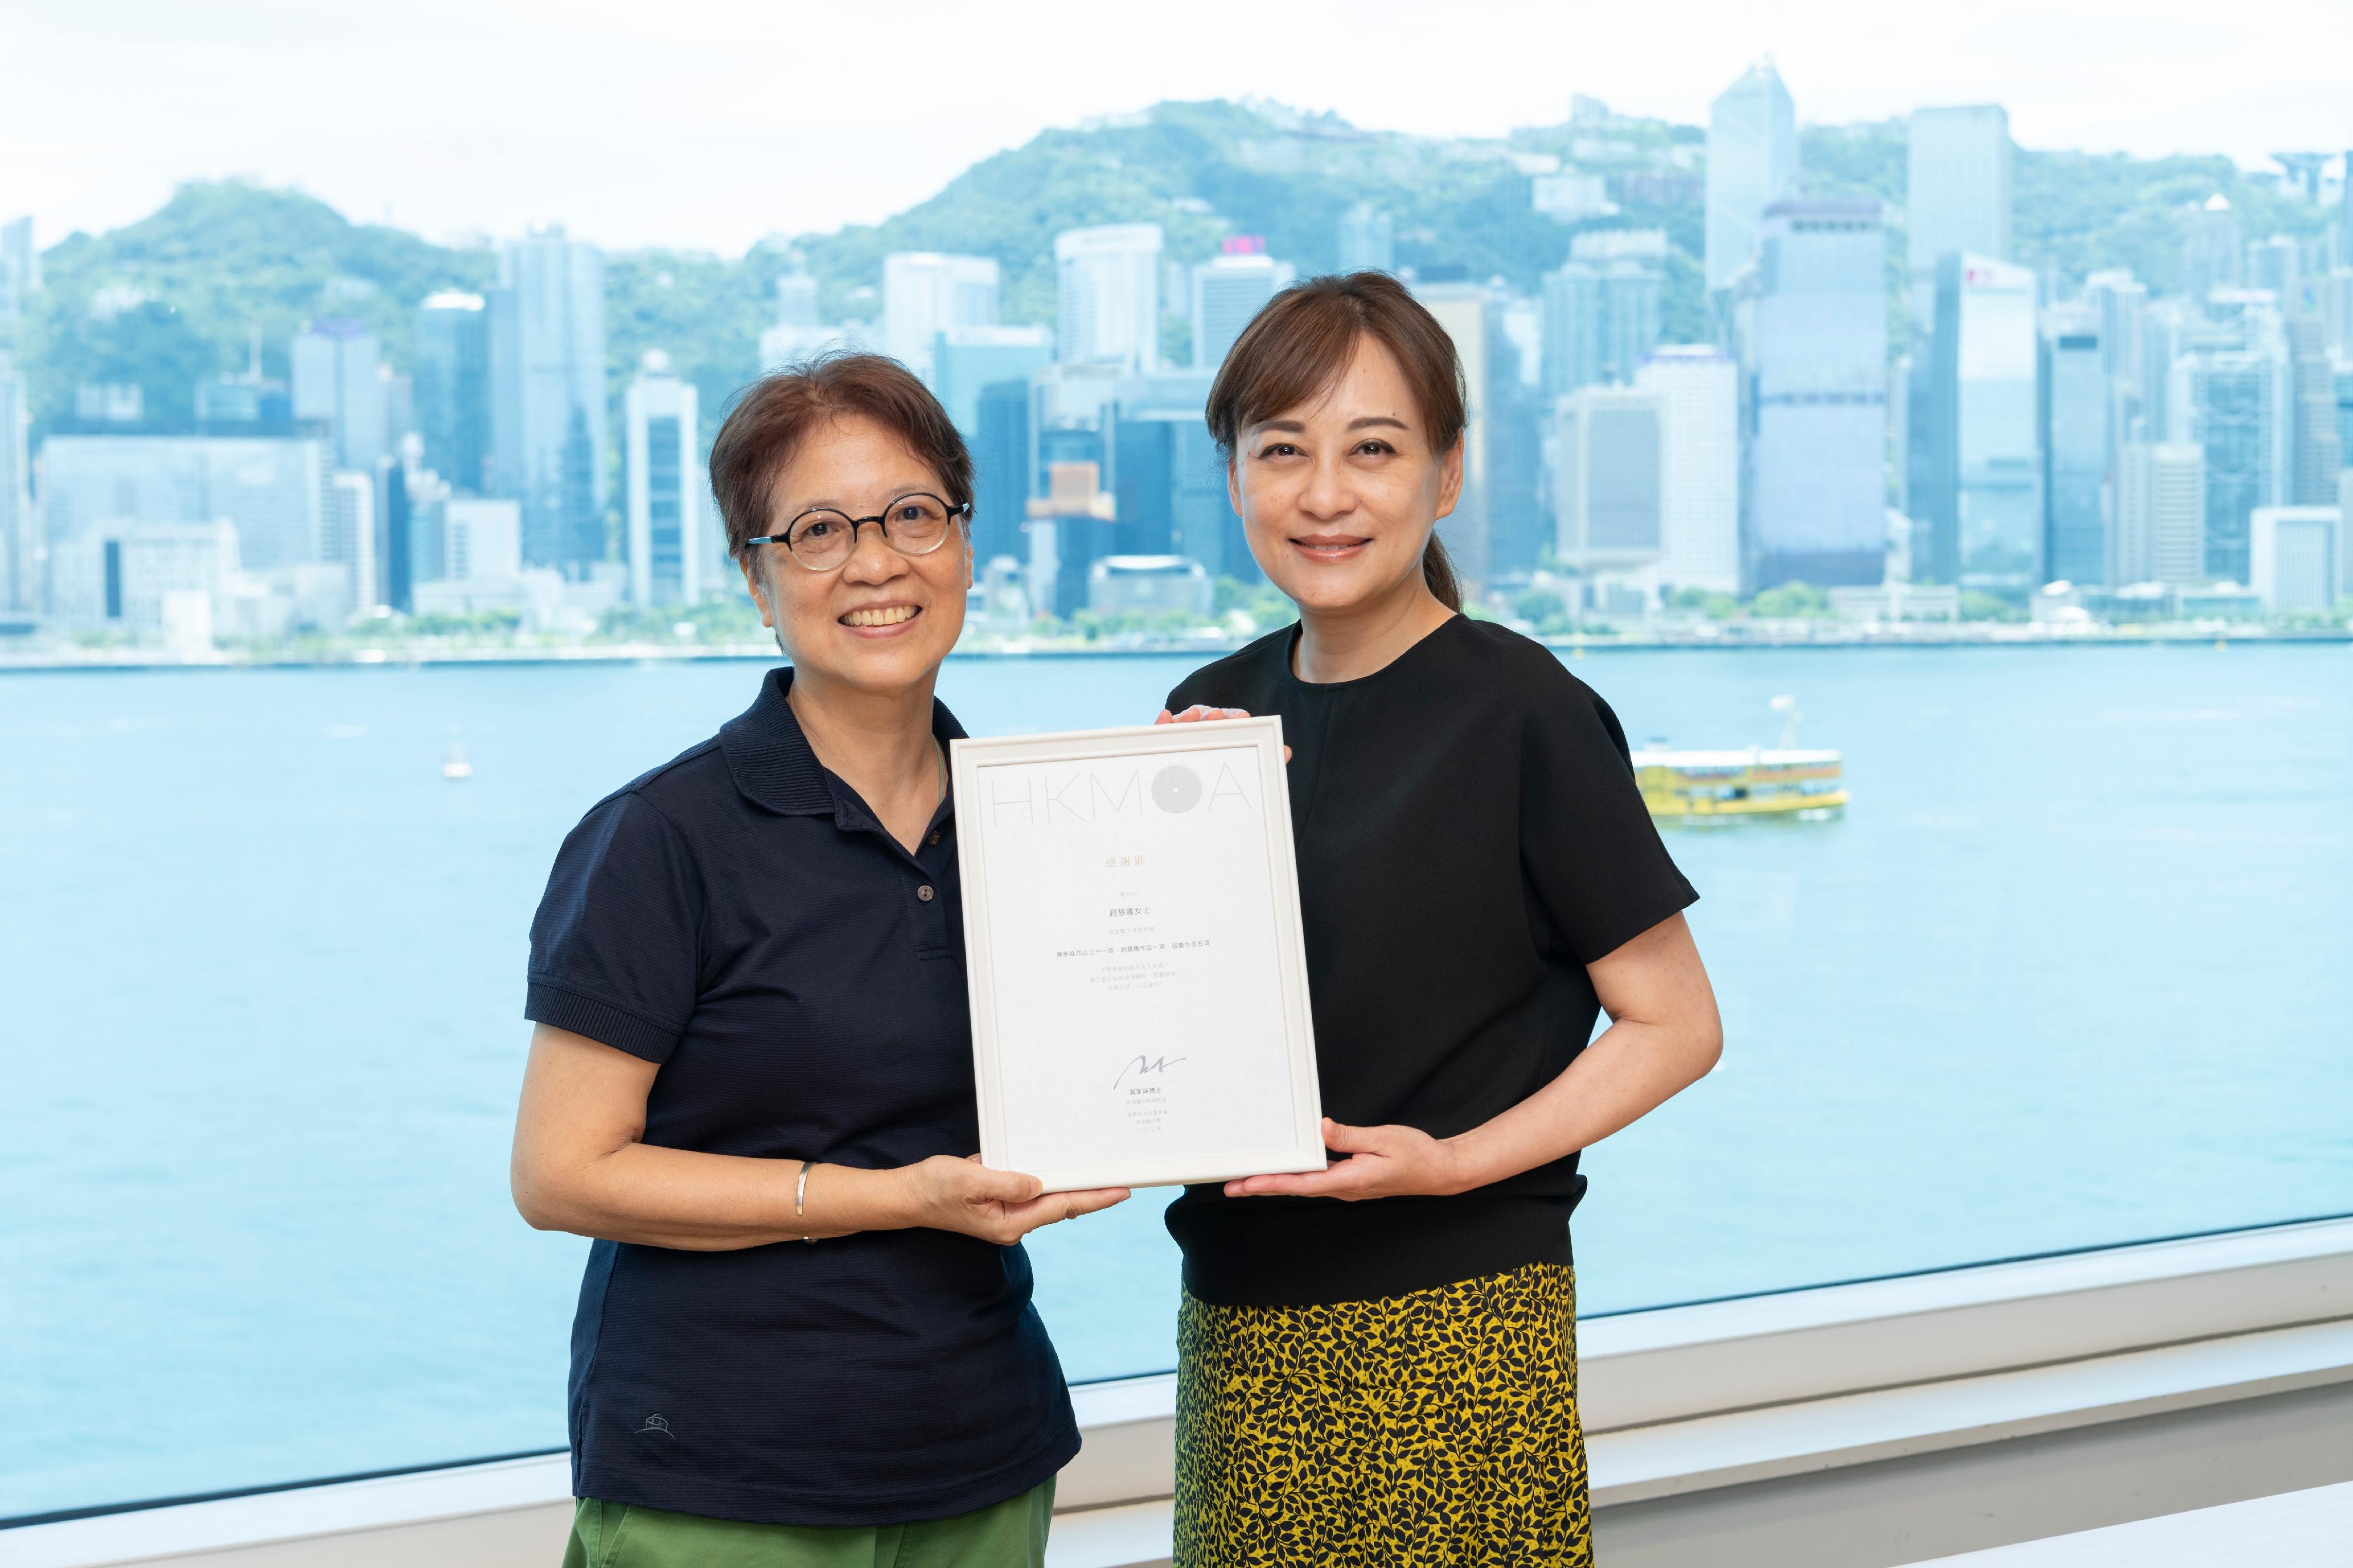 The Hong Kong Museum of Art has received a generous donation of 37 artworks from Ms Chiu Wai-yee, the wife of the late renowned Hong Kong artist Tong King-sum. The donated artworks include works by Tong and the late Hong Kong renowned artist Cheung Yee. Picture shows Chiu (left) and the Museum Director of the HKMoA, Dr Maria Mok (right).